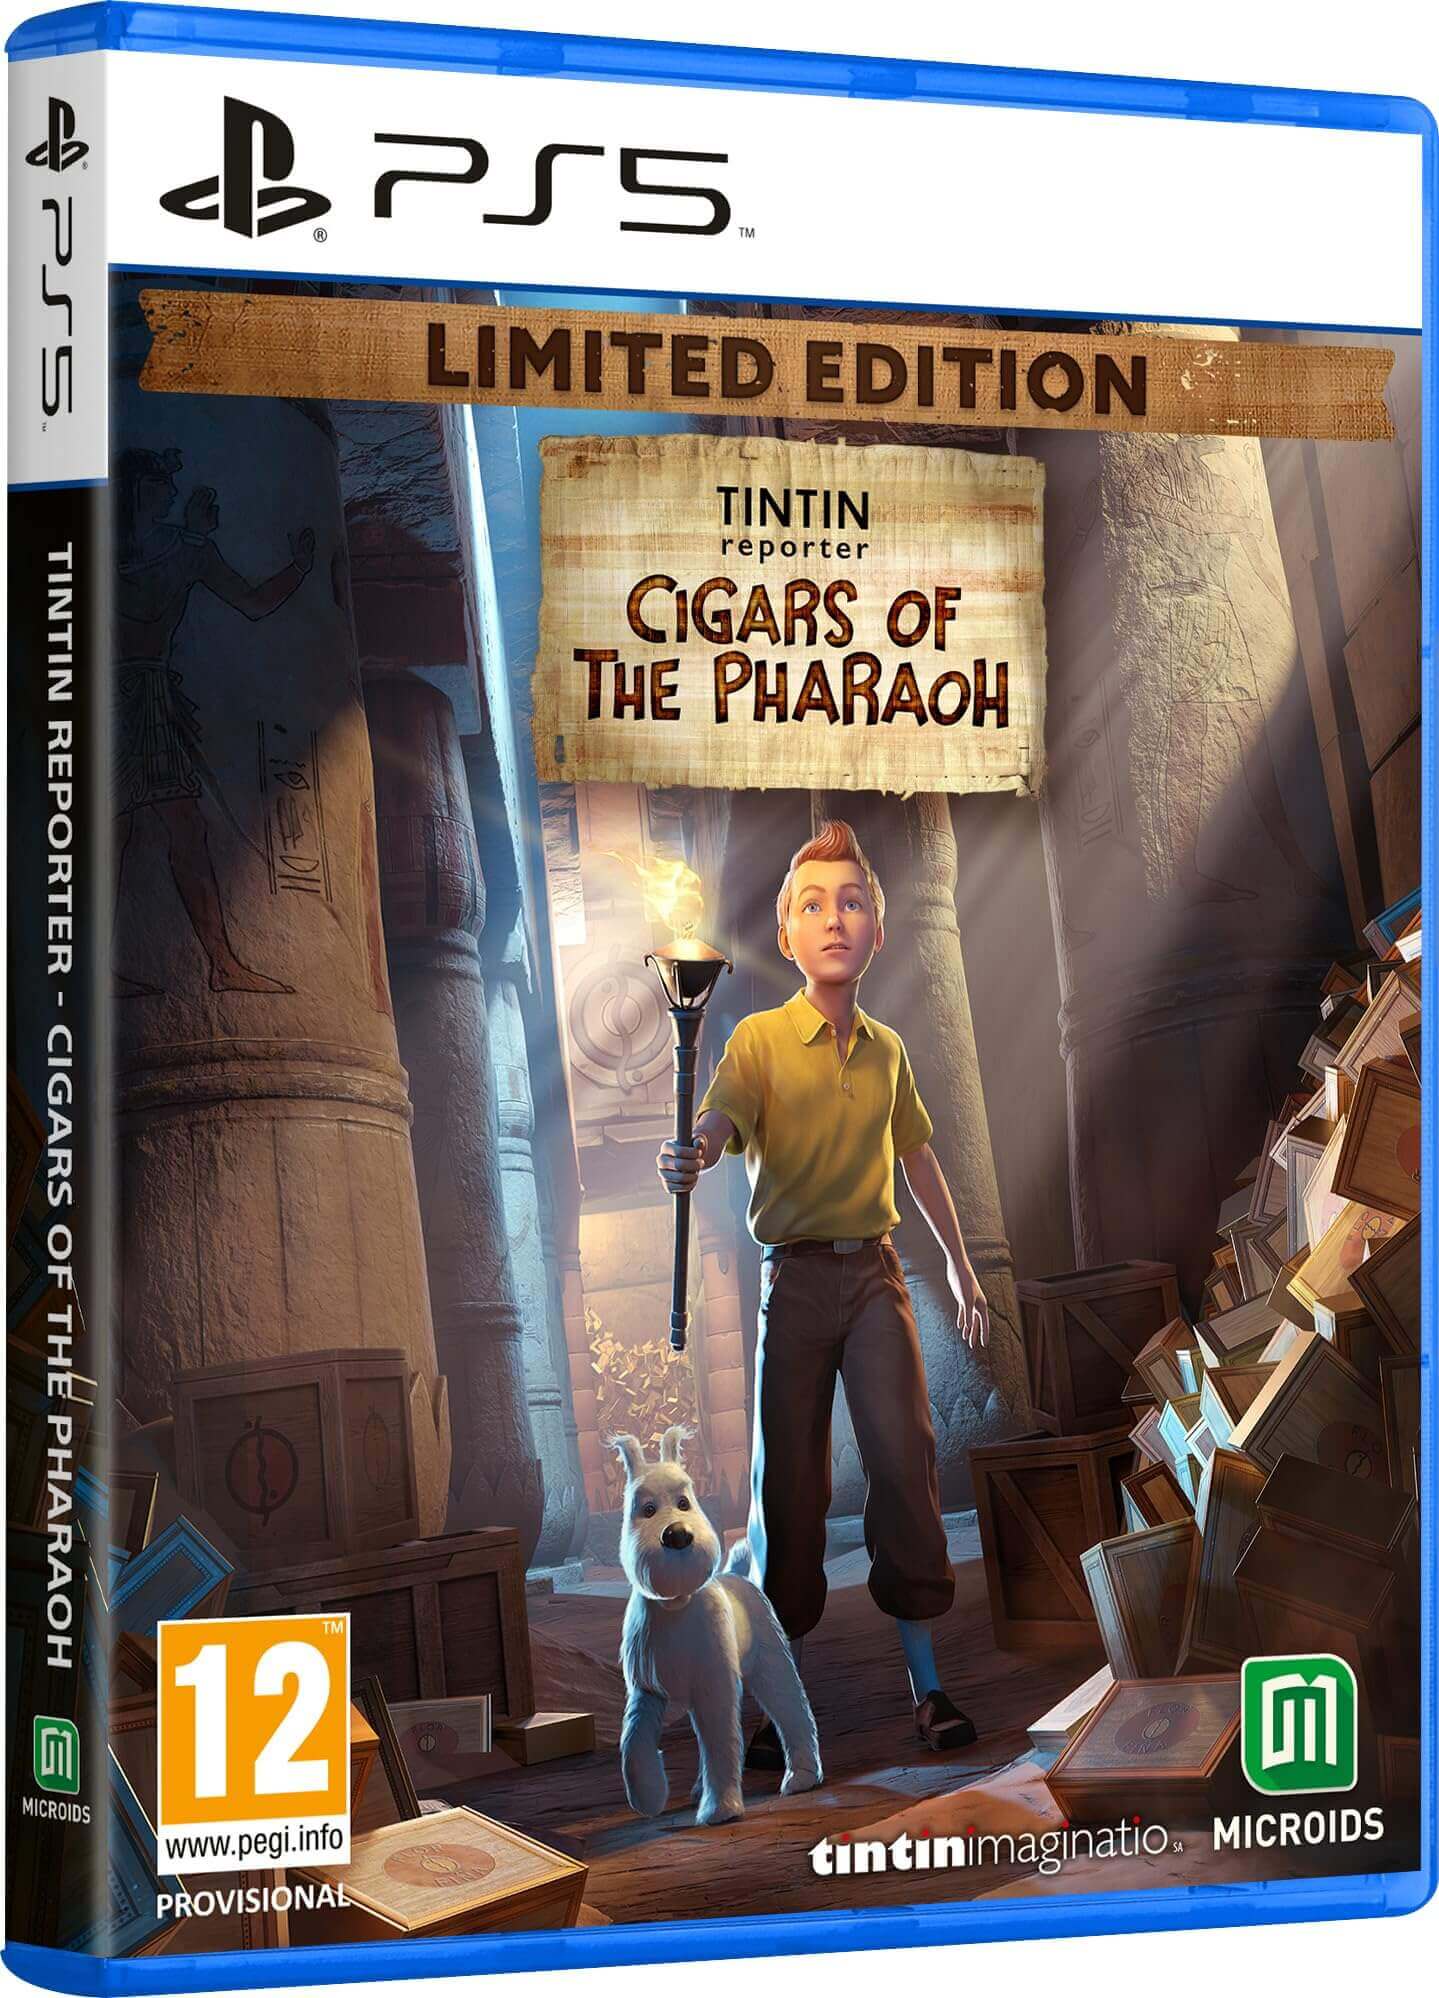 Tintin Reporter Cigars of the Pharaoh Limited Edition PS5 £39.99